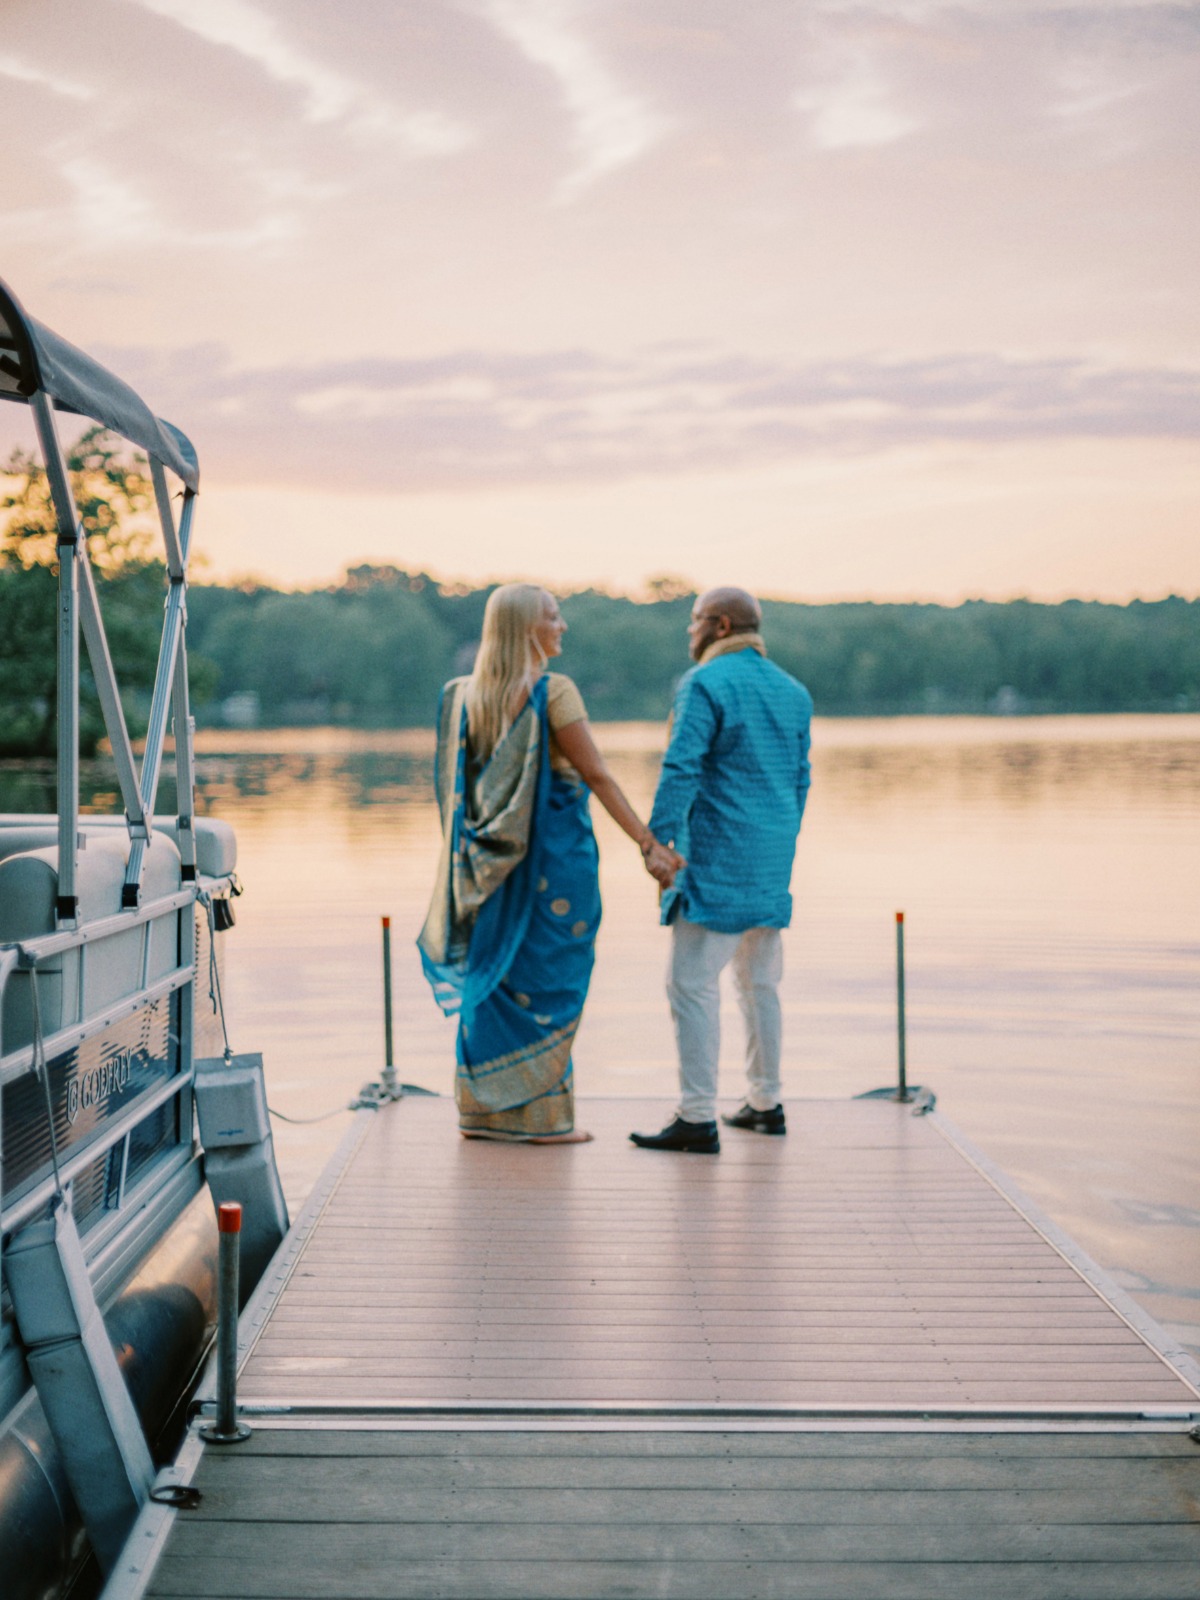 bride and groom on dock in Indian wedding attire in shades of teal